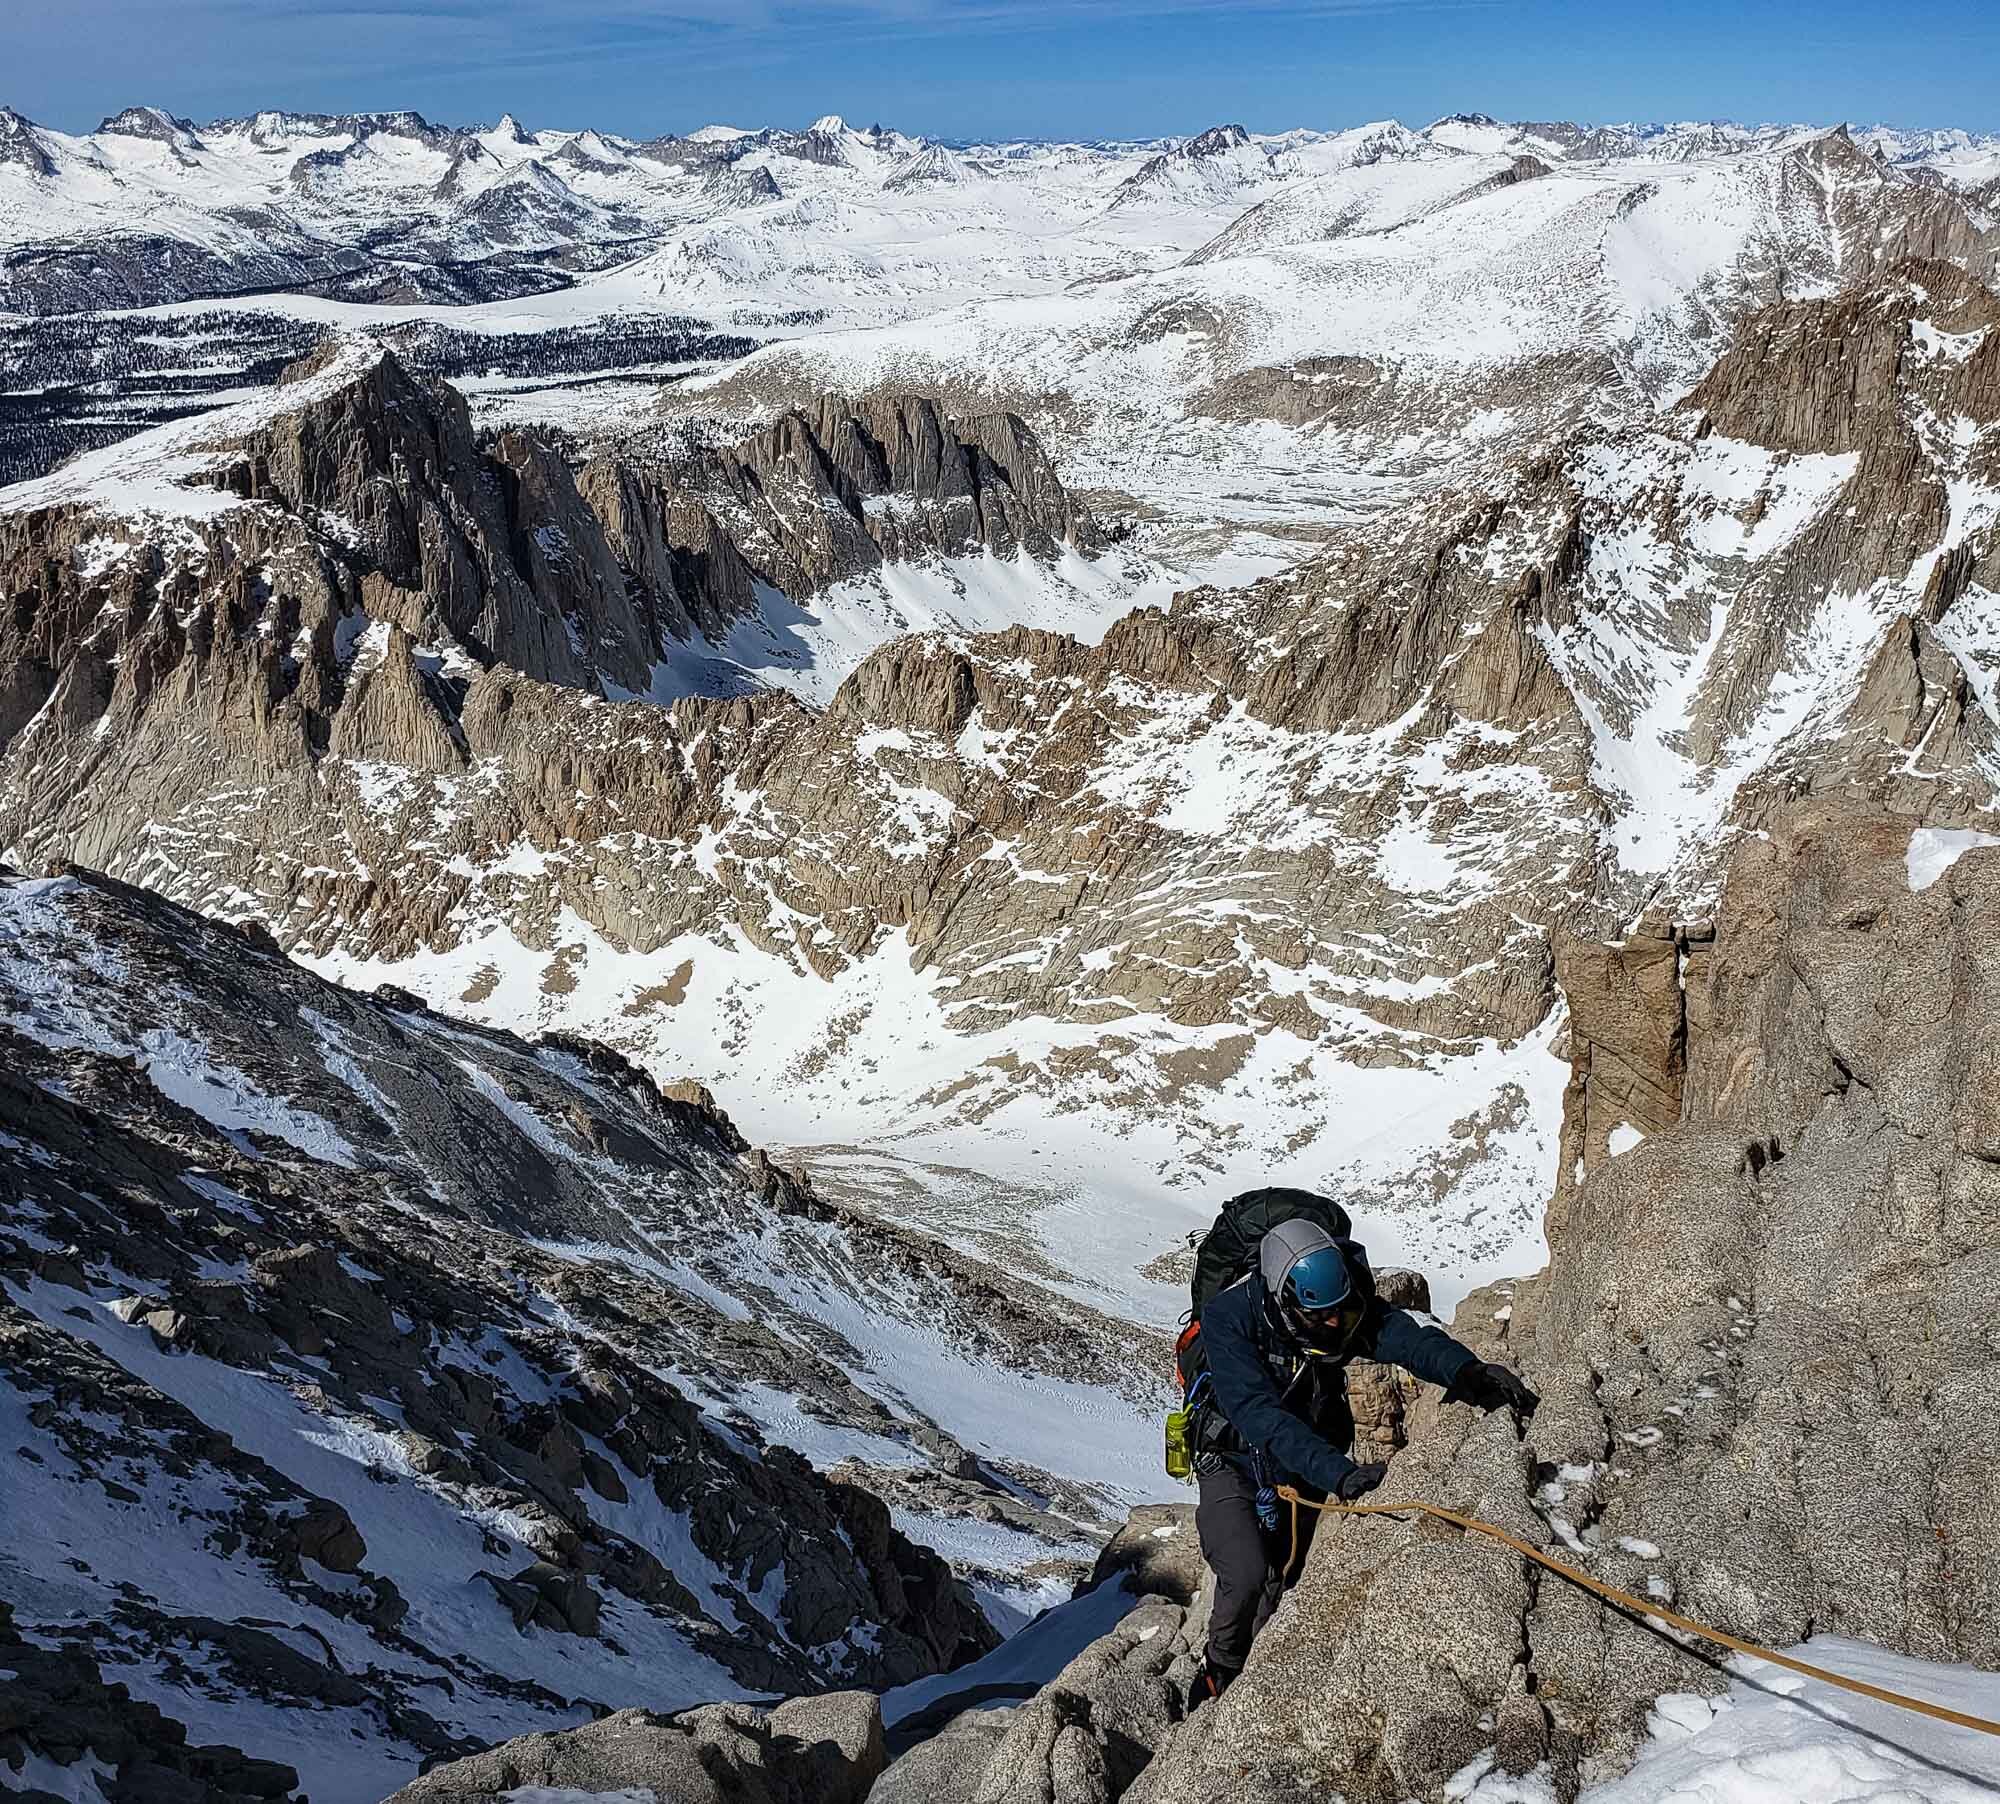 Roped Climbing on the upper gully of Mt. Whitney's Mountaineers Route